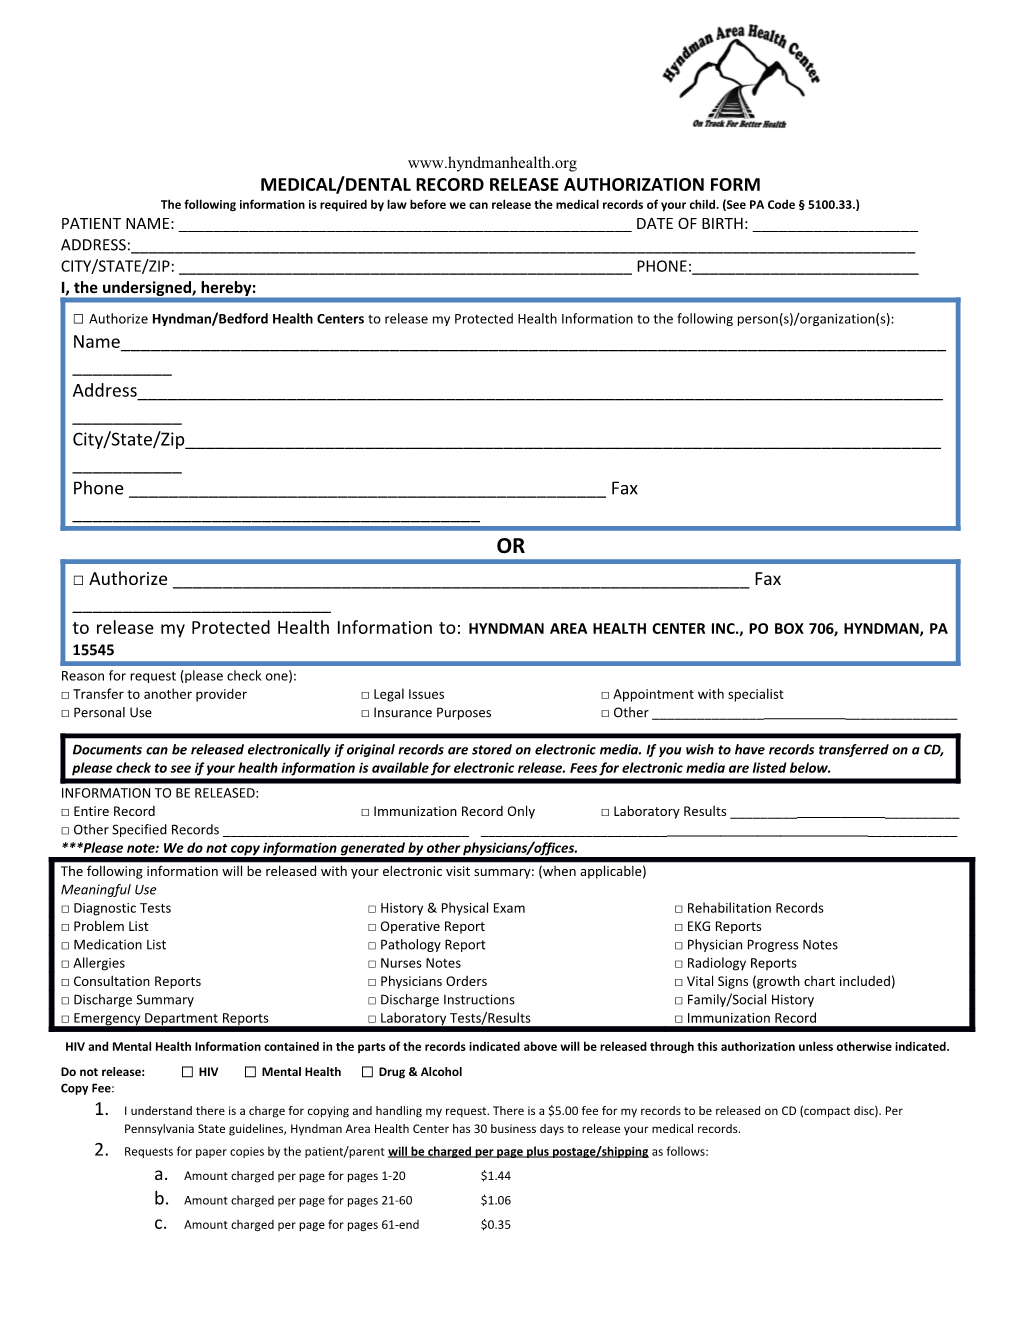 Medical/Dental Record Release Authorization Form